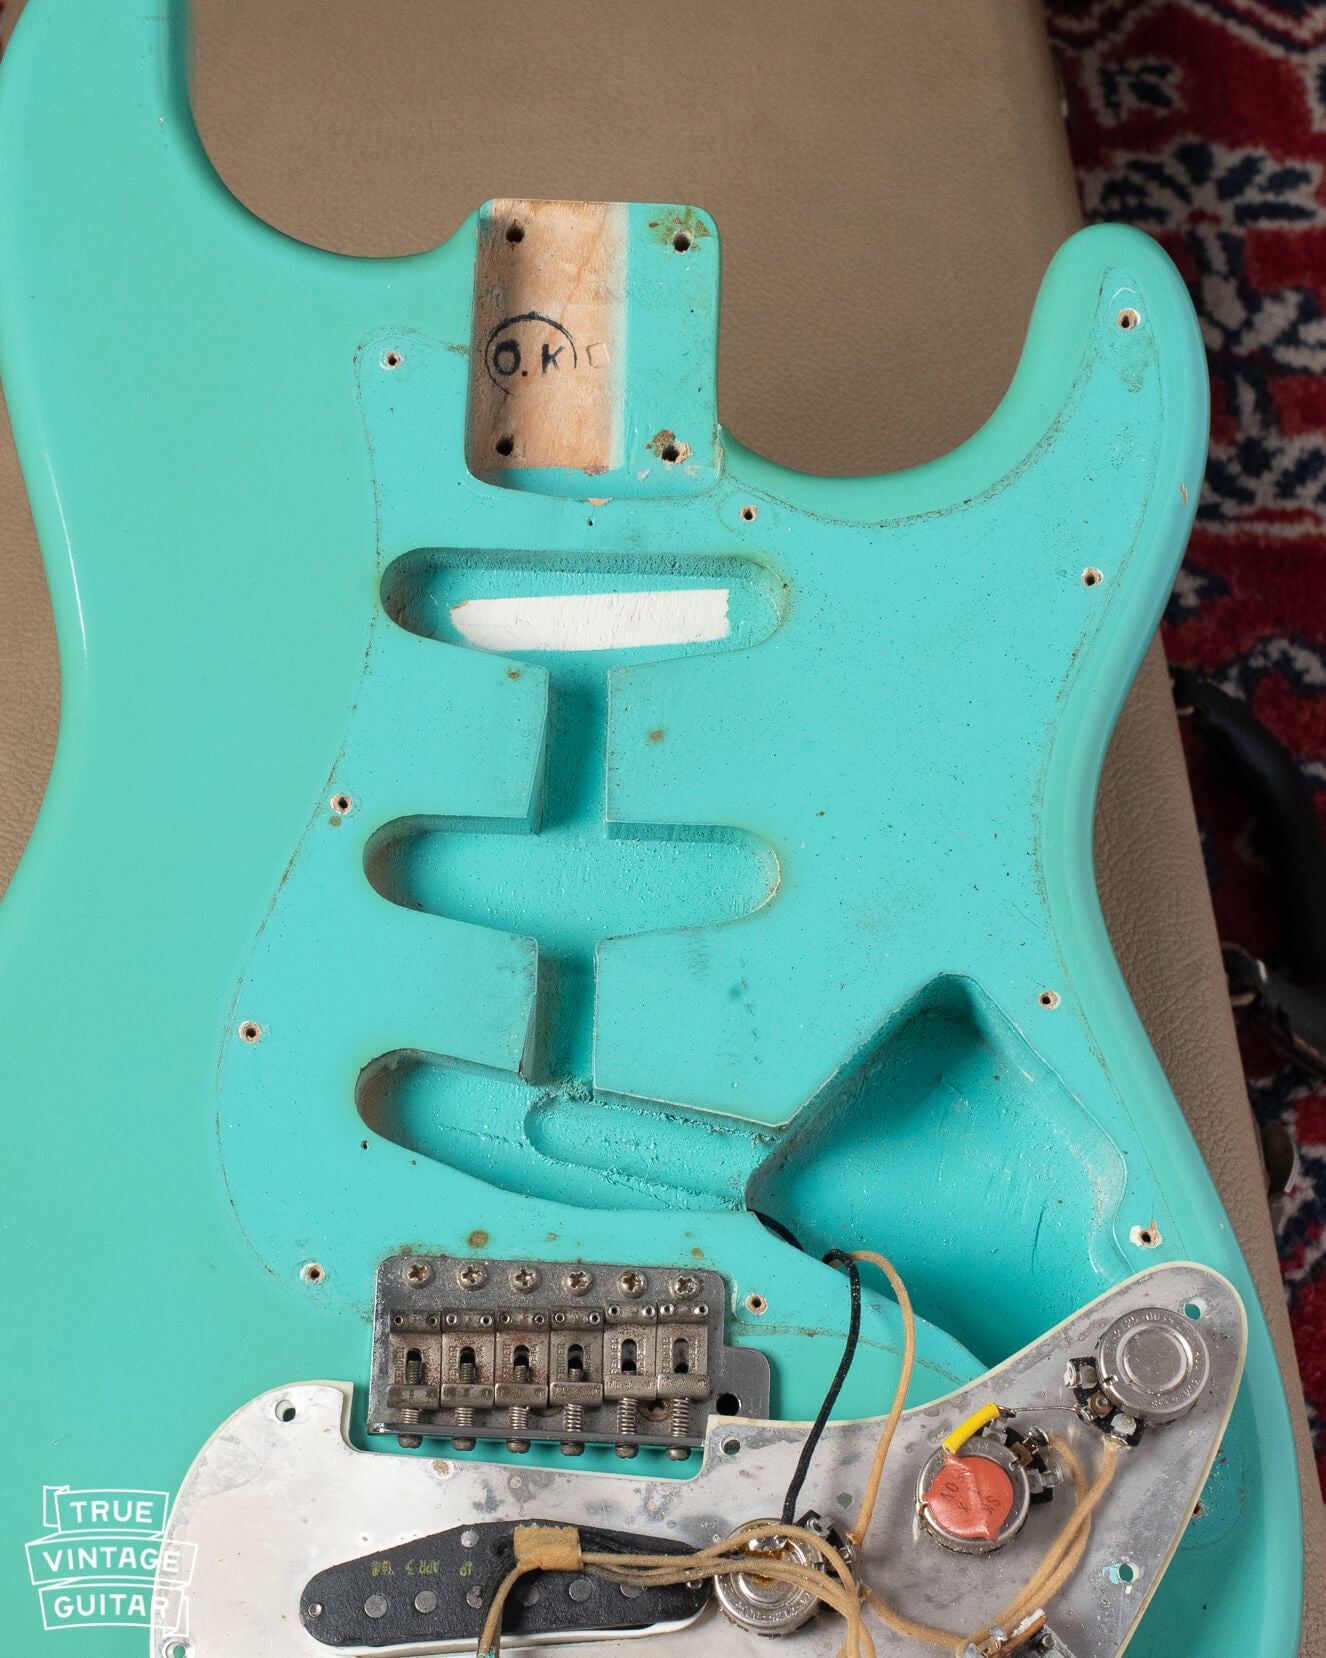 Vintage Fender Stratocaster custom color identification with cavity edges, nail holes, white undercoat, and neck pocket with OK stamp